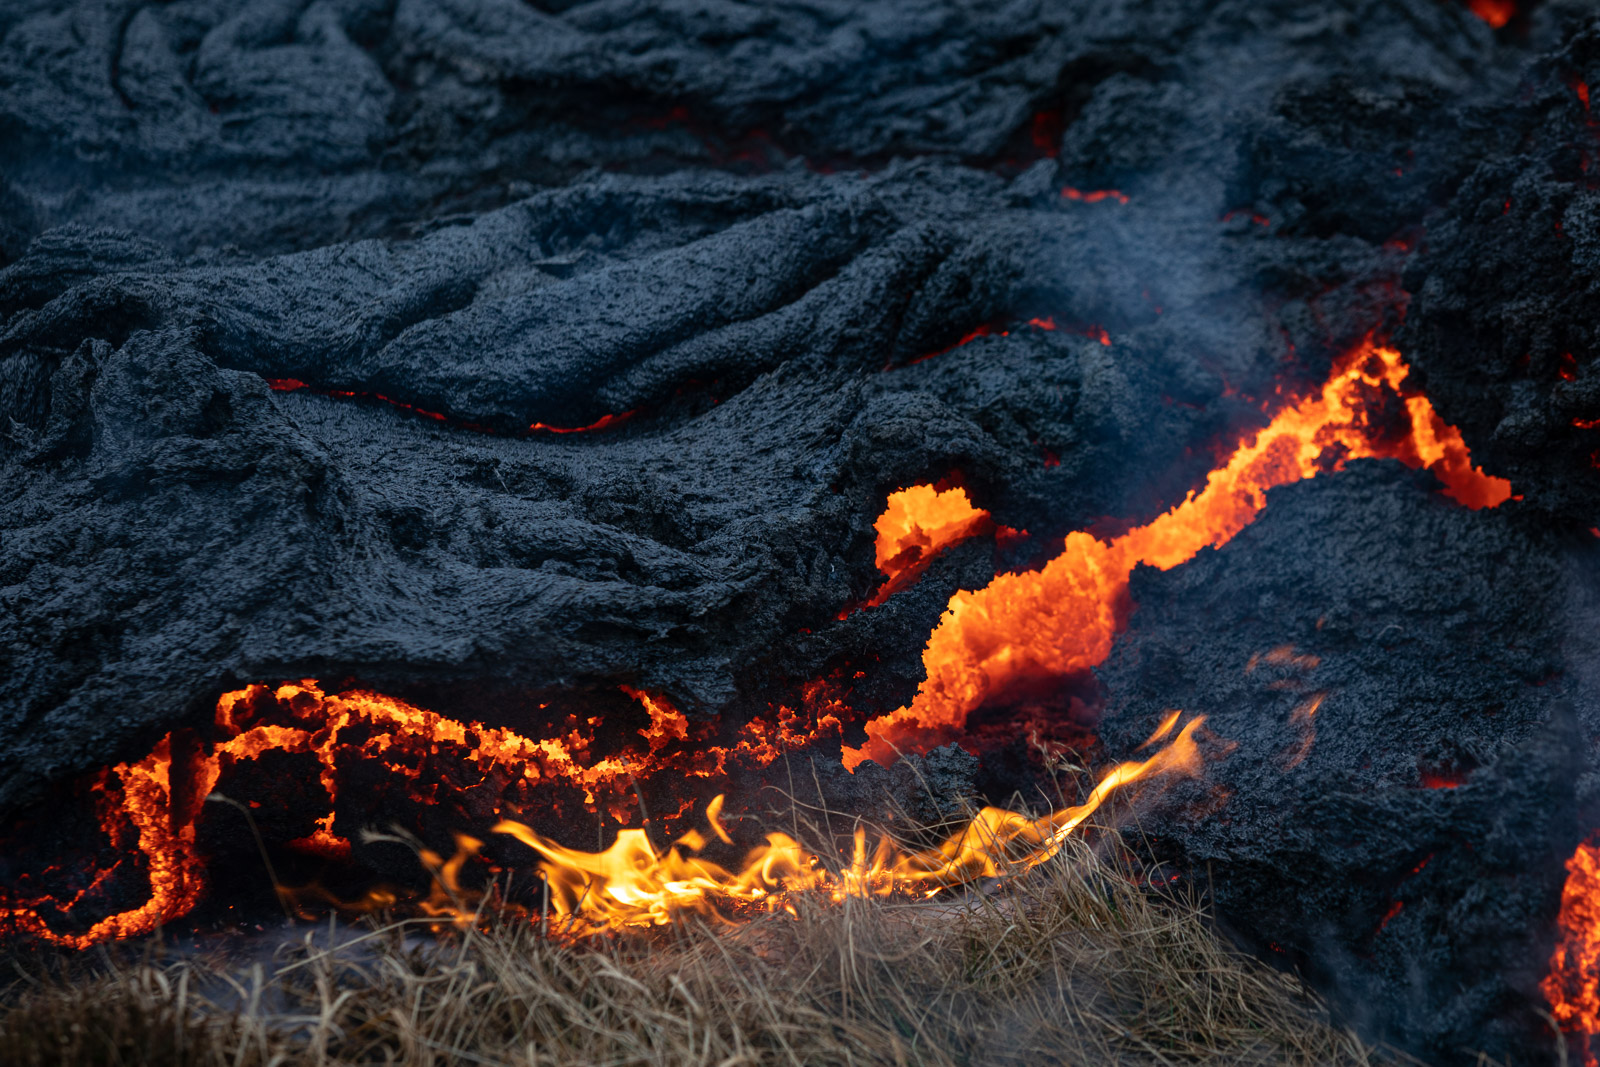 From Iceland – Lava from Geldingadalur is the most primitive Iceland that has been seen for 7000 years